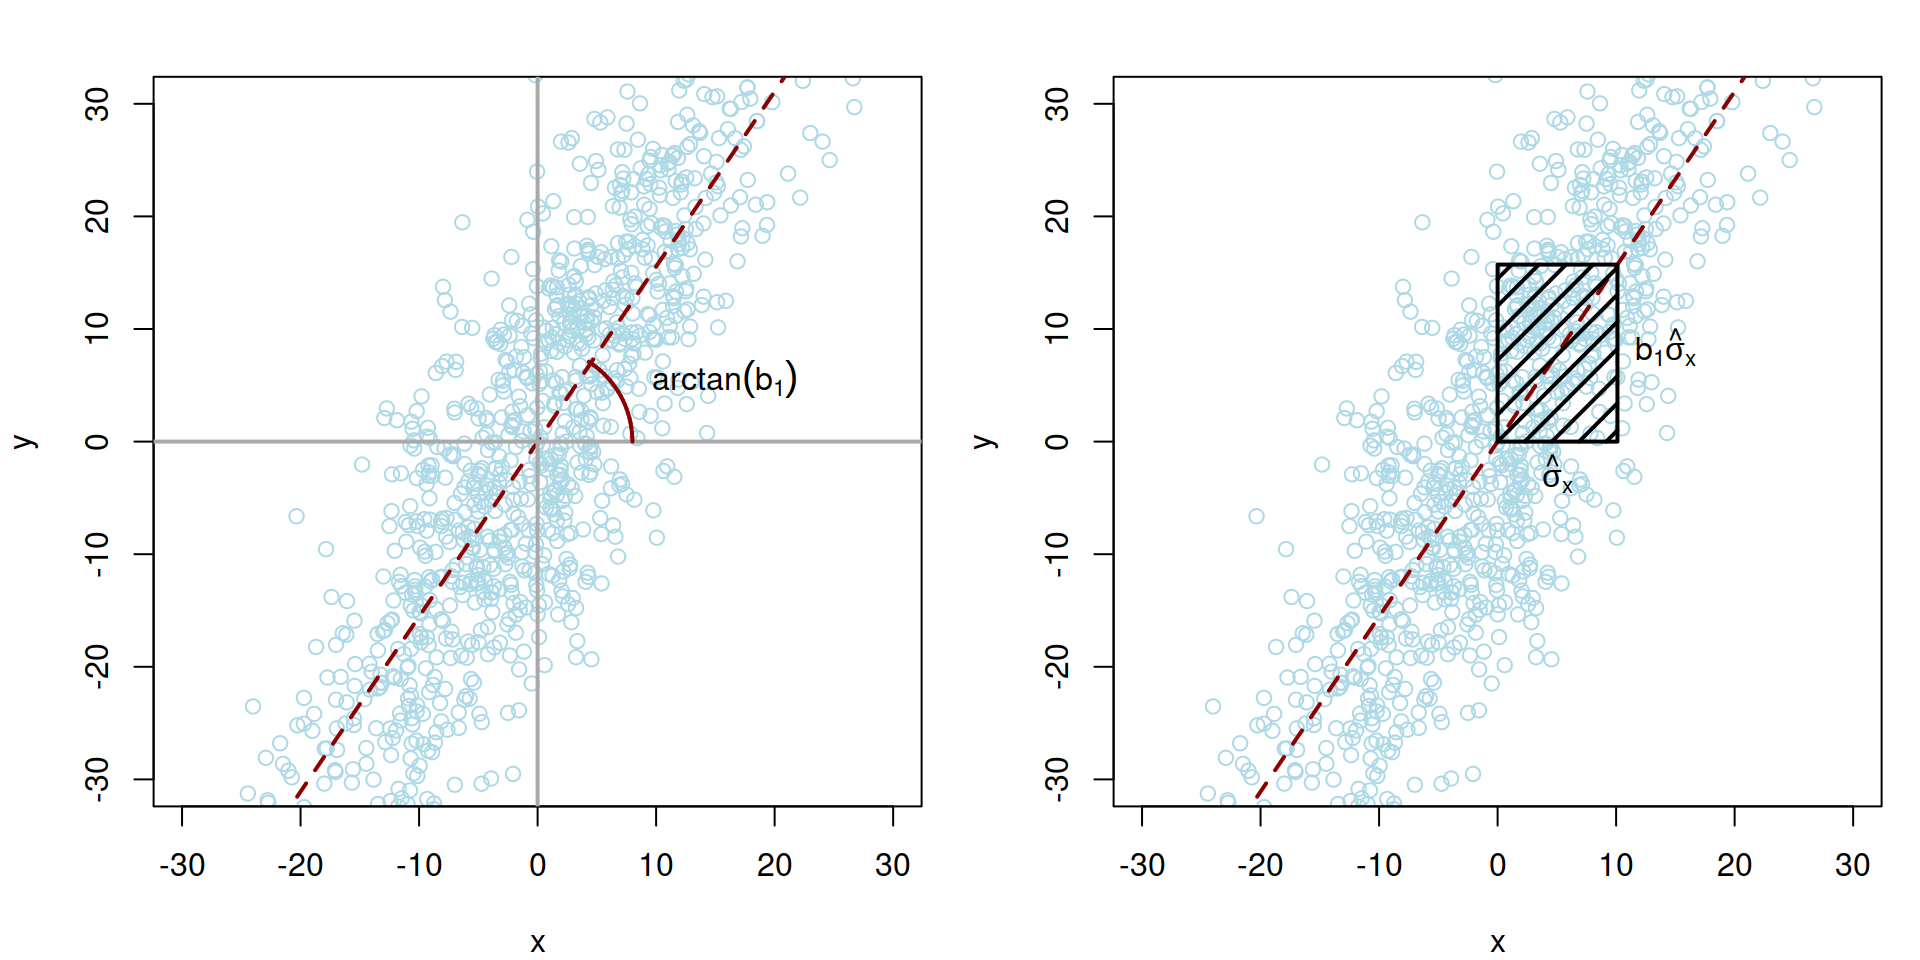 Visualisation of covariance between two random variables, $x$ and $y$.